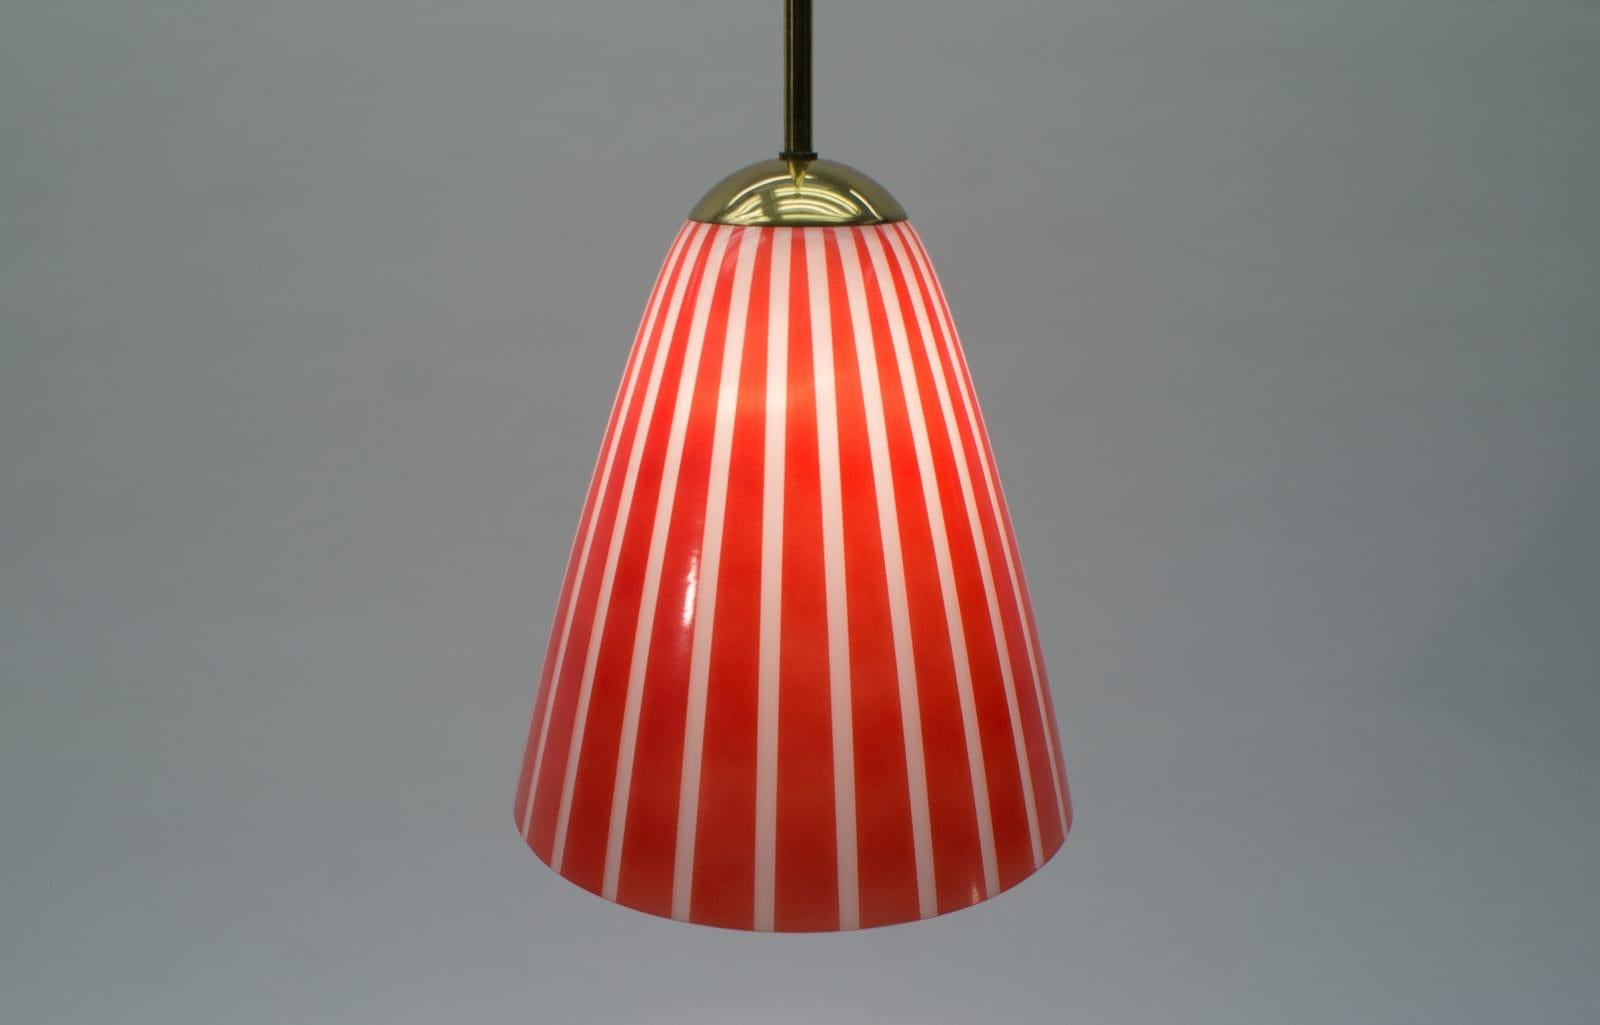 Elegant Mid-Century Modern Pendant Lamp Made of Brass and Glass, 1950s Austria For Sale 4